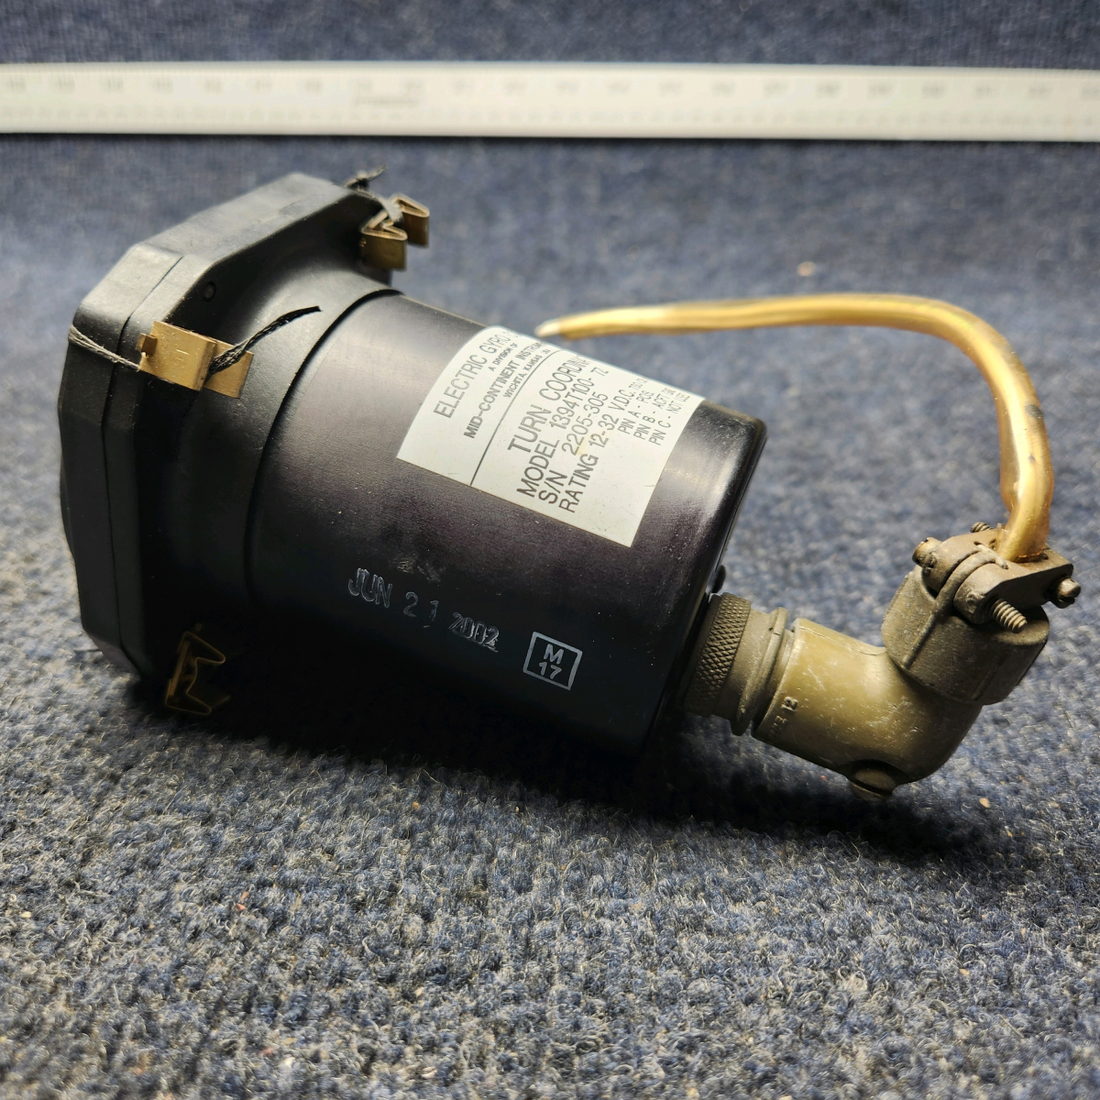 Used aircraft parts for sale, 1394T100-7Z Mid-Continent PIPIR PA32RT-300 MID-CONTINENT INSTRUMENT TURN COORDINATOR INDICATOR (VOLTS: 12-32)